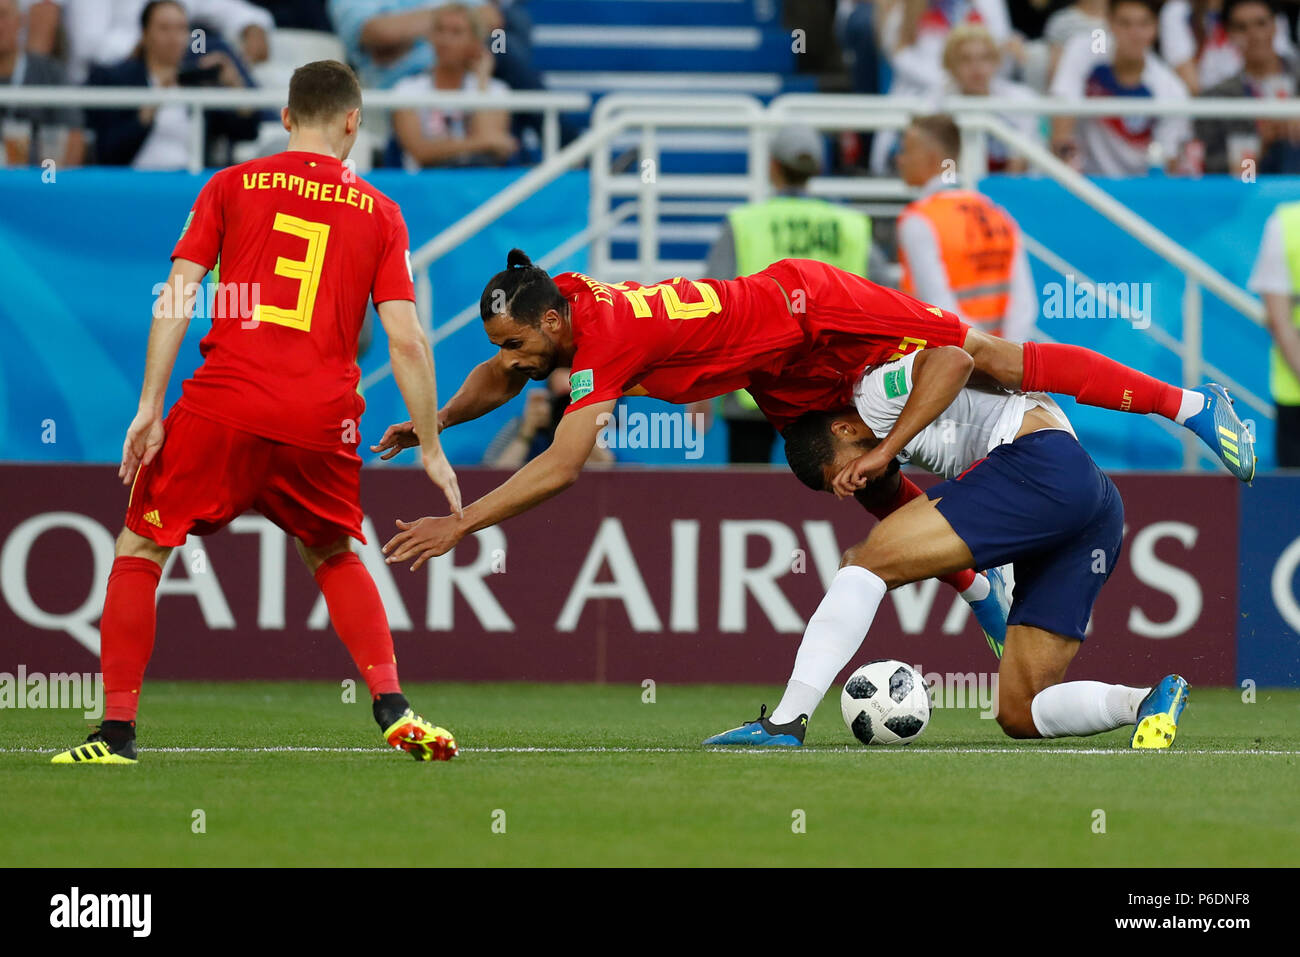 Kaliningrad, Russia. 28th June, 2018. Ruben Loftus-Cheek of England and Nacer Chadli of Belgium during the 2018 FIFA World Cup Group G match between England and Belgium at Kaliningrad Stadium on June 28th 2018 in Kaliningrad, Russia. (Photo by Daniel Chesterton/) Credit: PHC Images/Alamy Live News Stock Photo